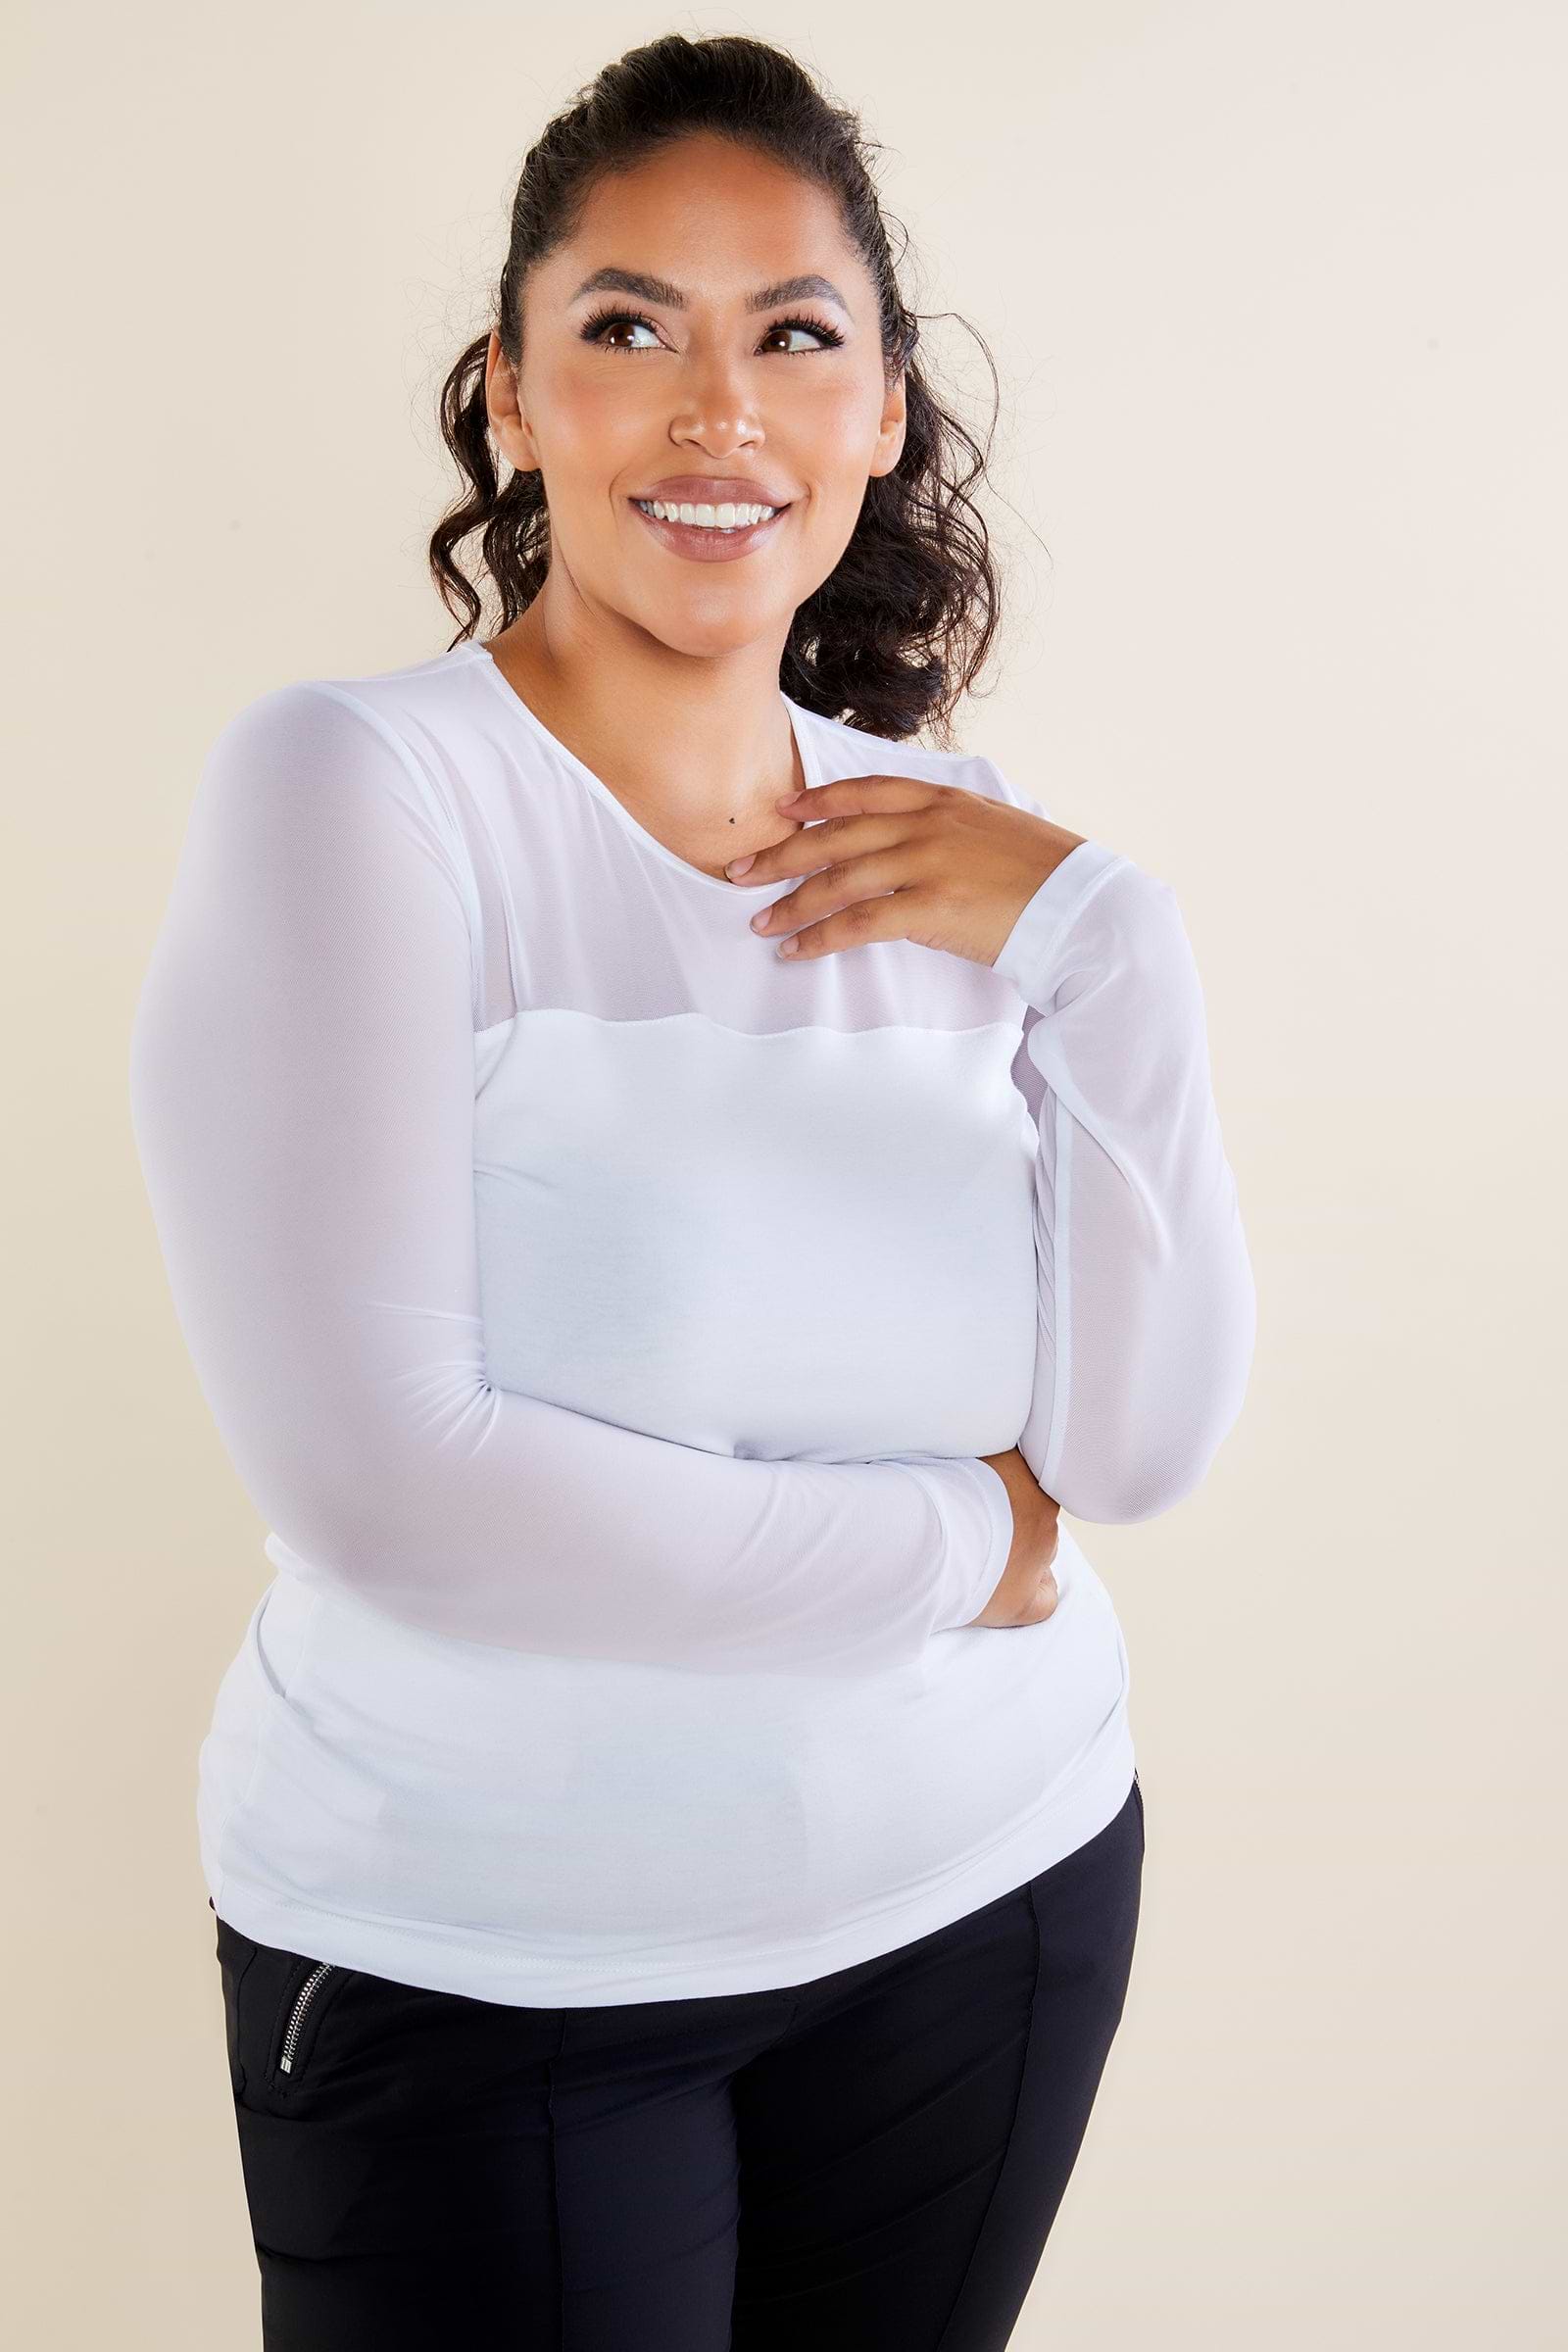 The Best Travel Shirt. Woman Showing the Front Profile of a Budah Mesh Pima Cotton Shirt in White